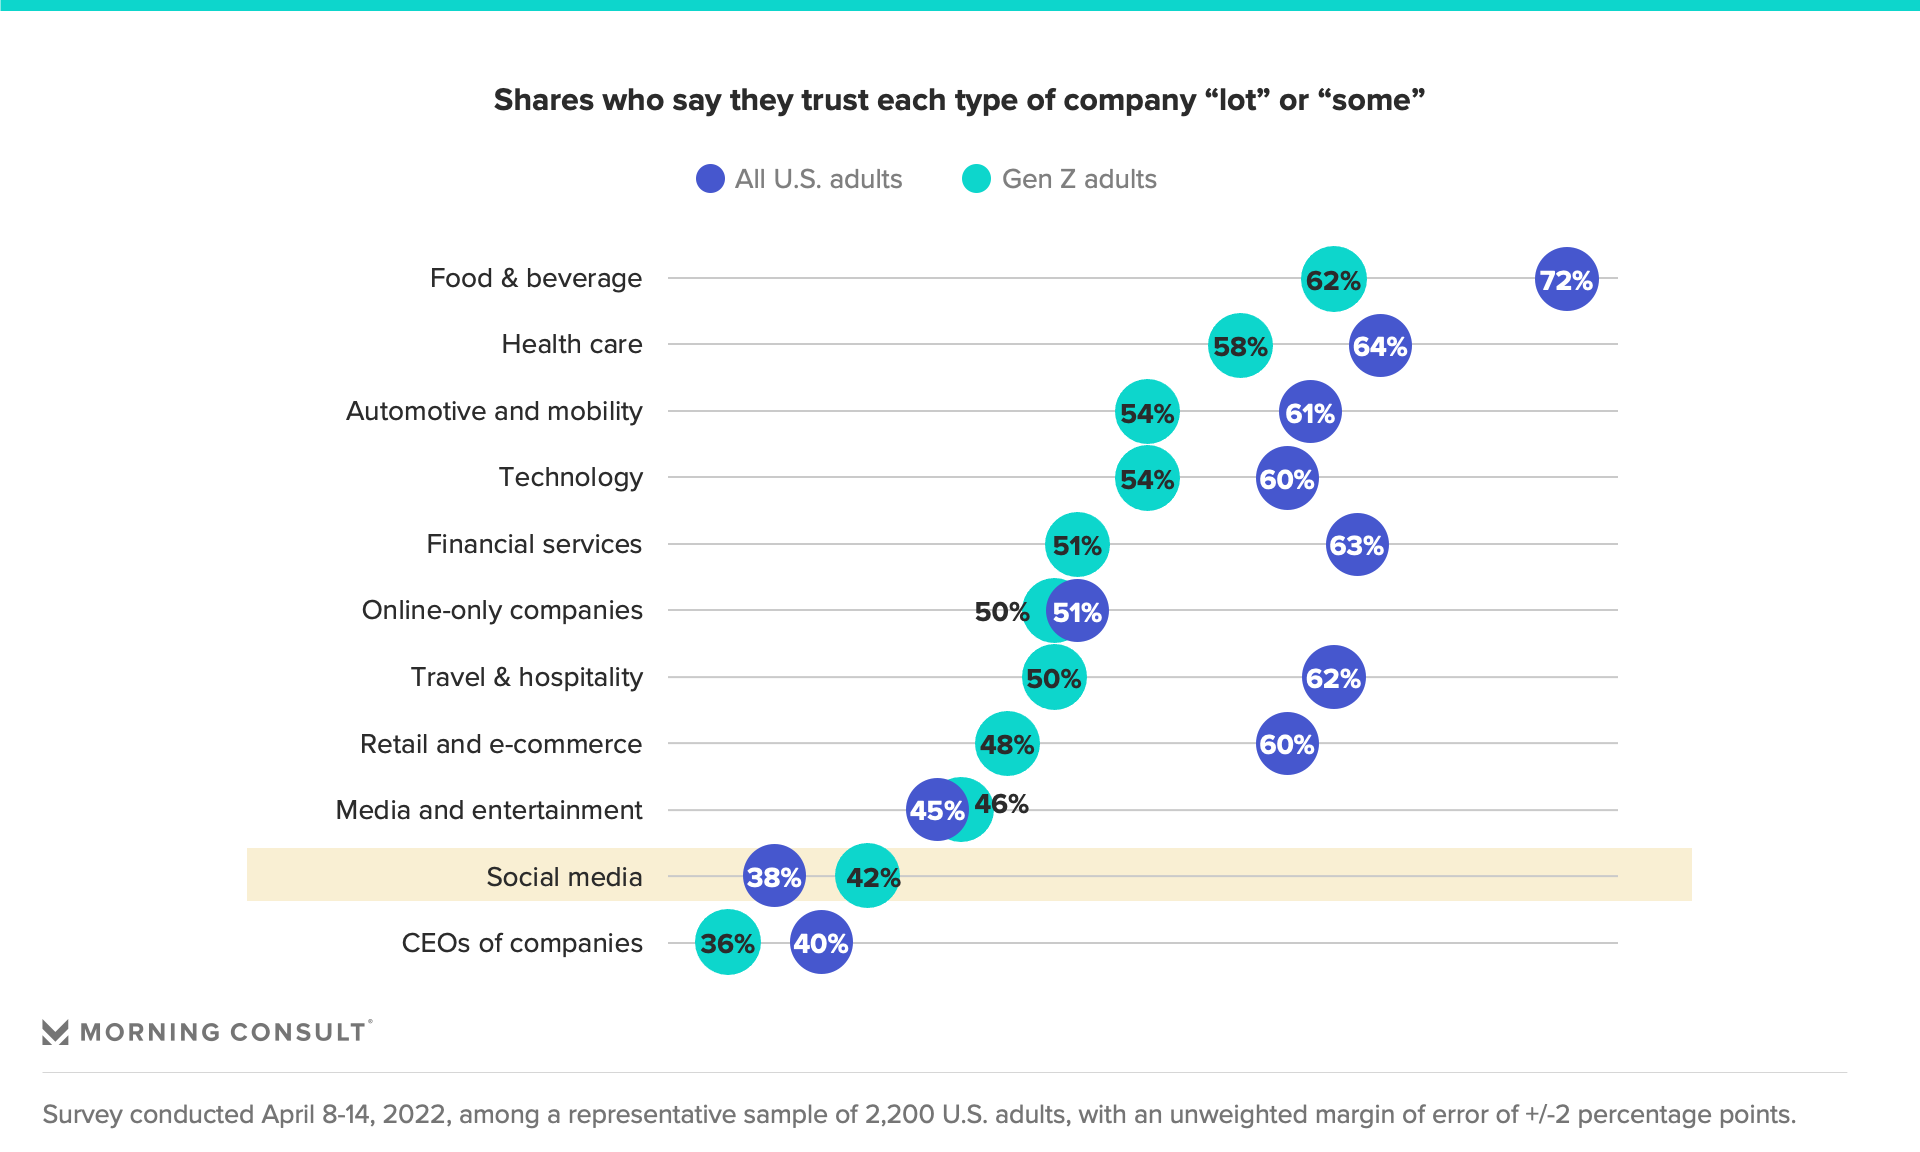 Graph showing comparative shares of U.S. adults and Gen Z adults who trust different types of companies